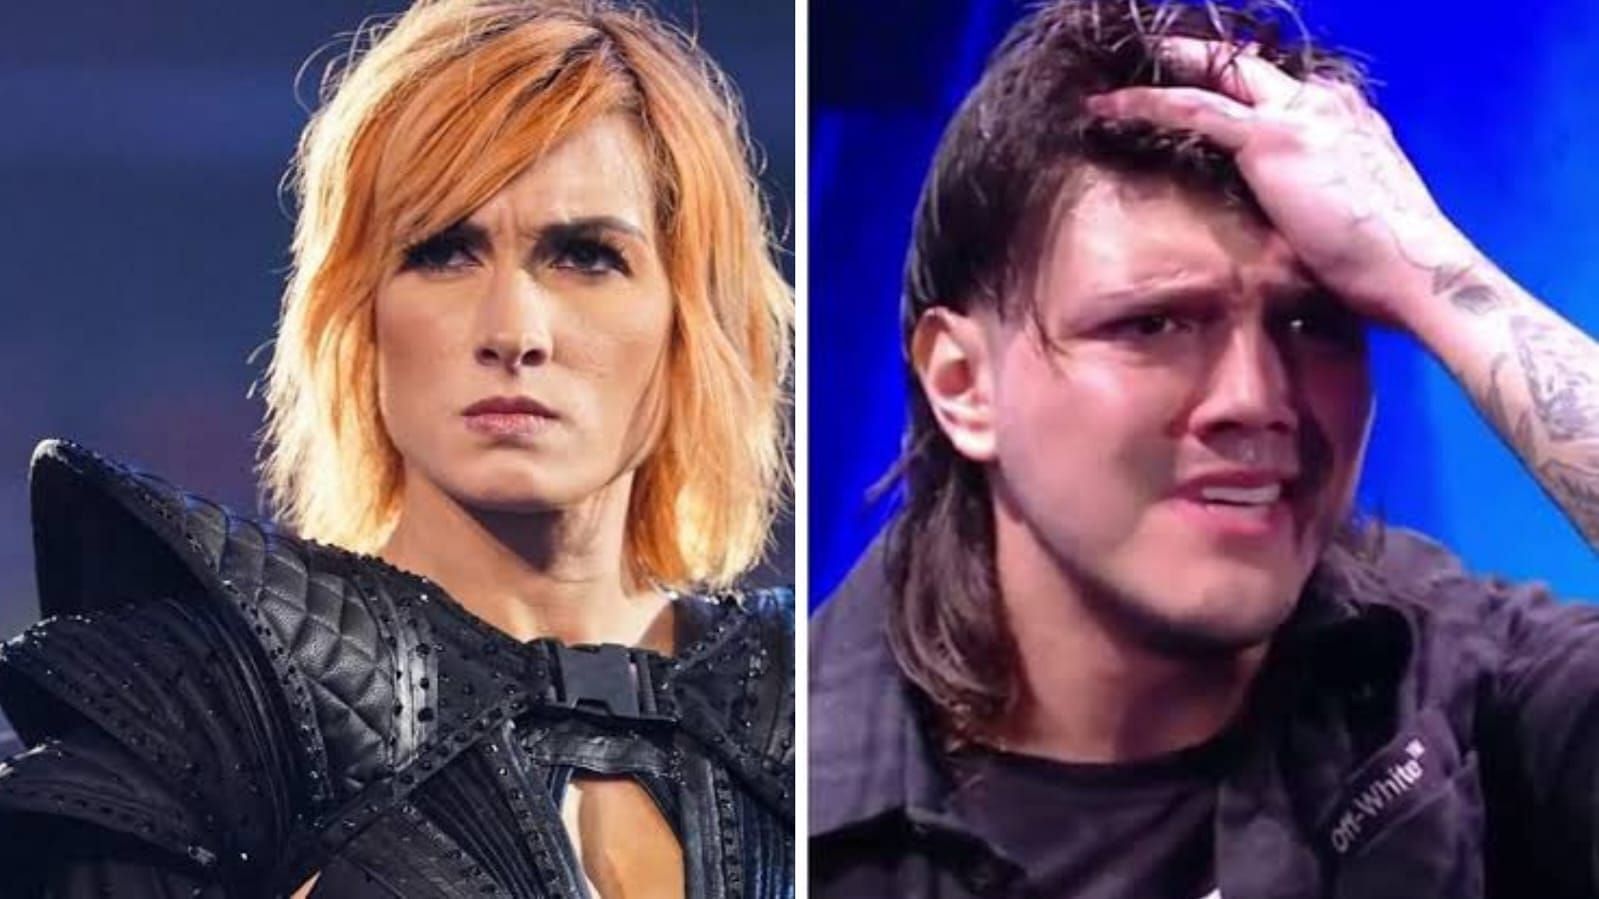 Becky Lynch and Dominik Mysterio are shining on Tuesday nights.